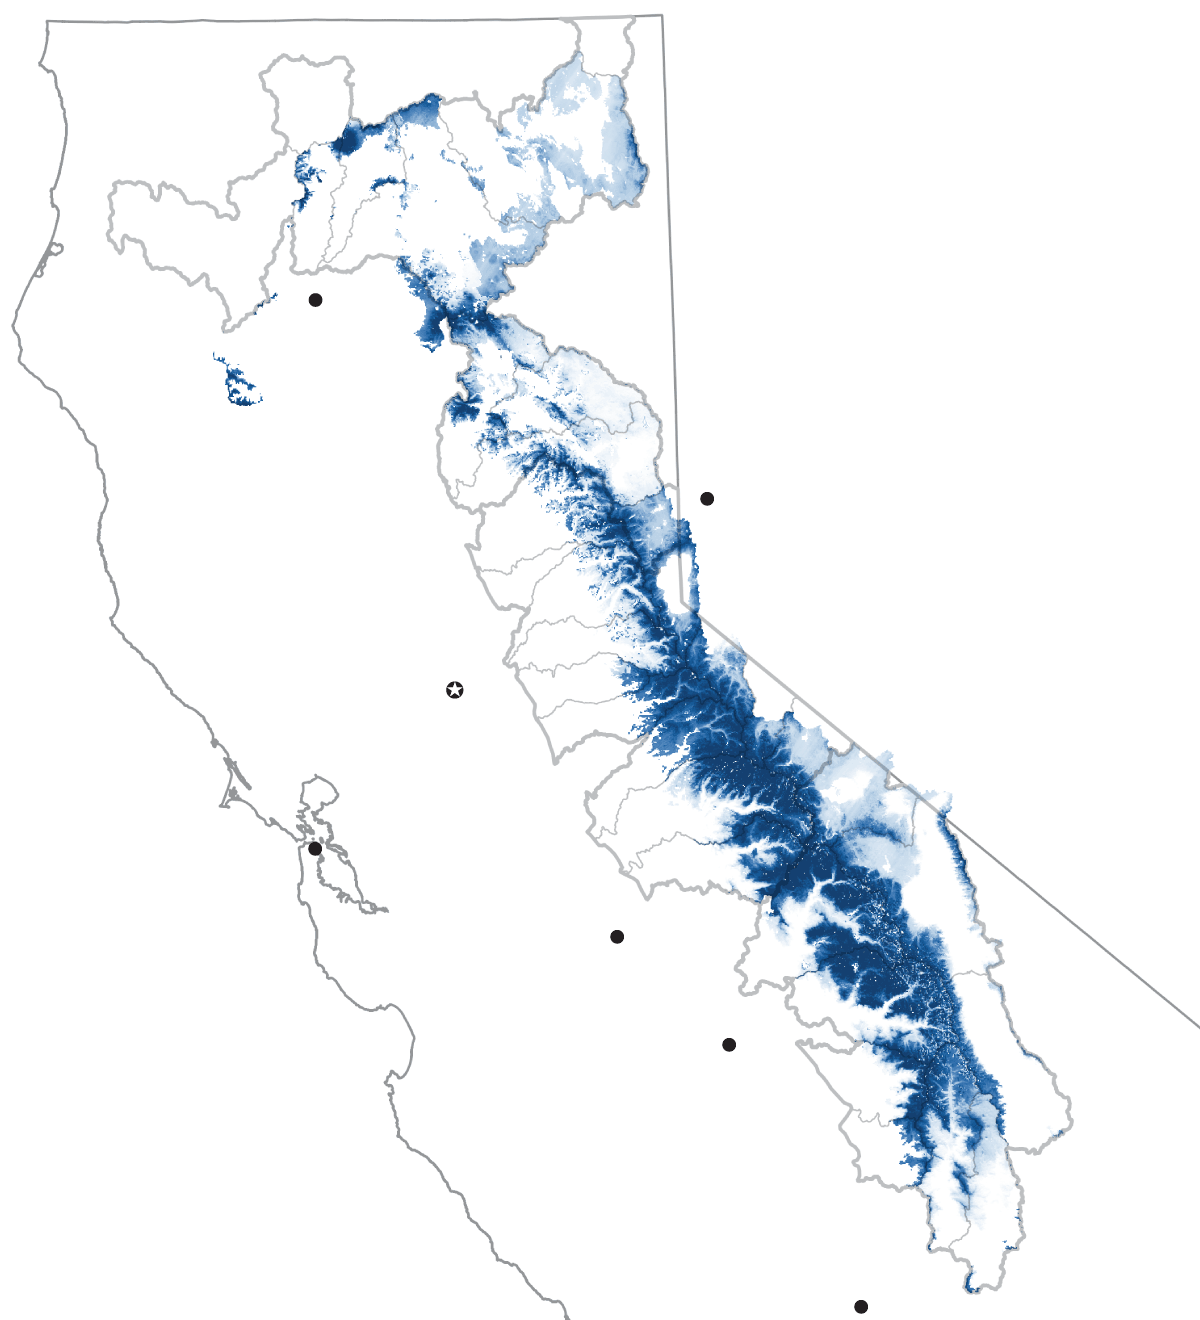 Maps show the extent of the Sierra snowpack compared to the historical average